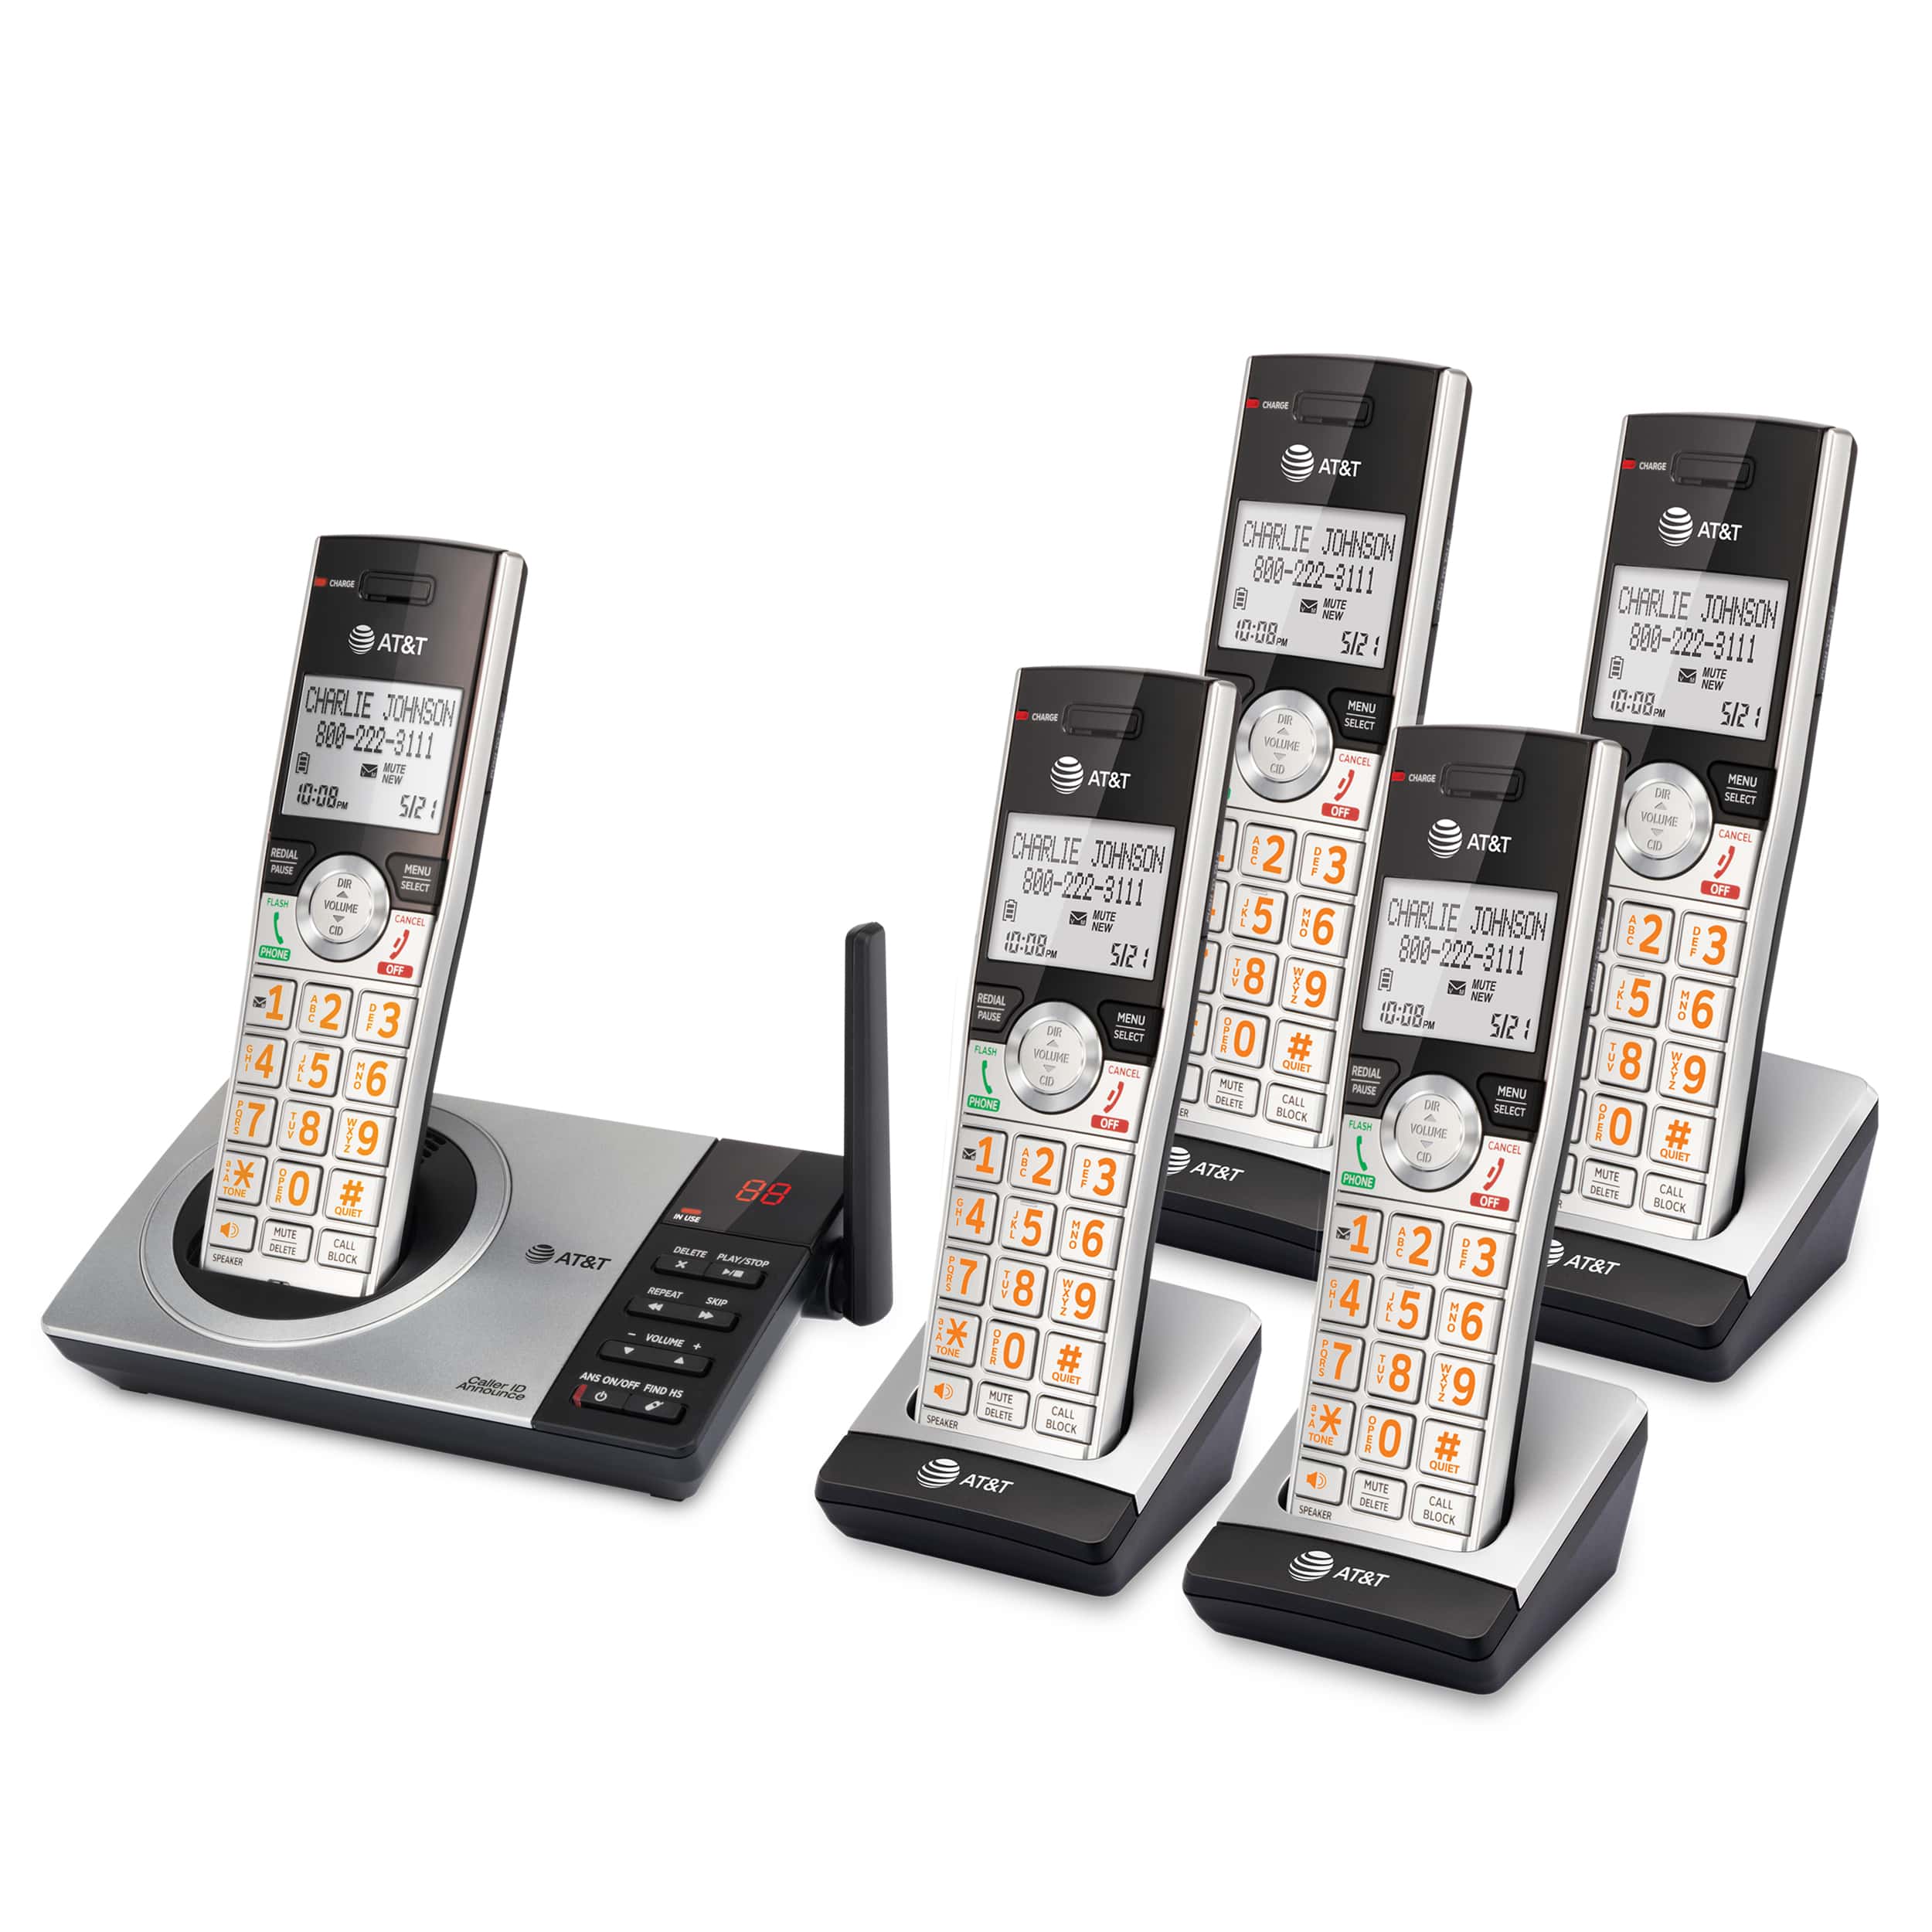 5 handset cordless answering system with smart call blocker - view 2